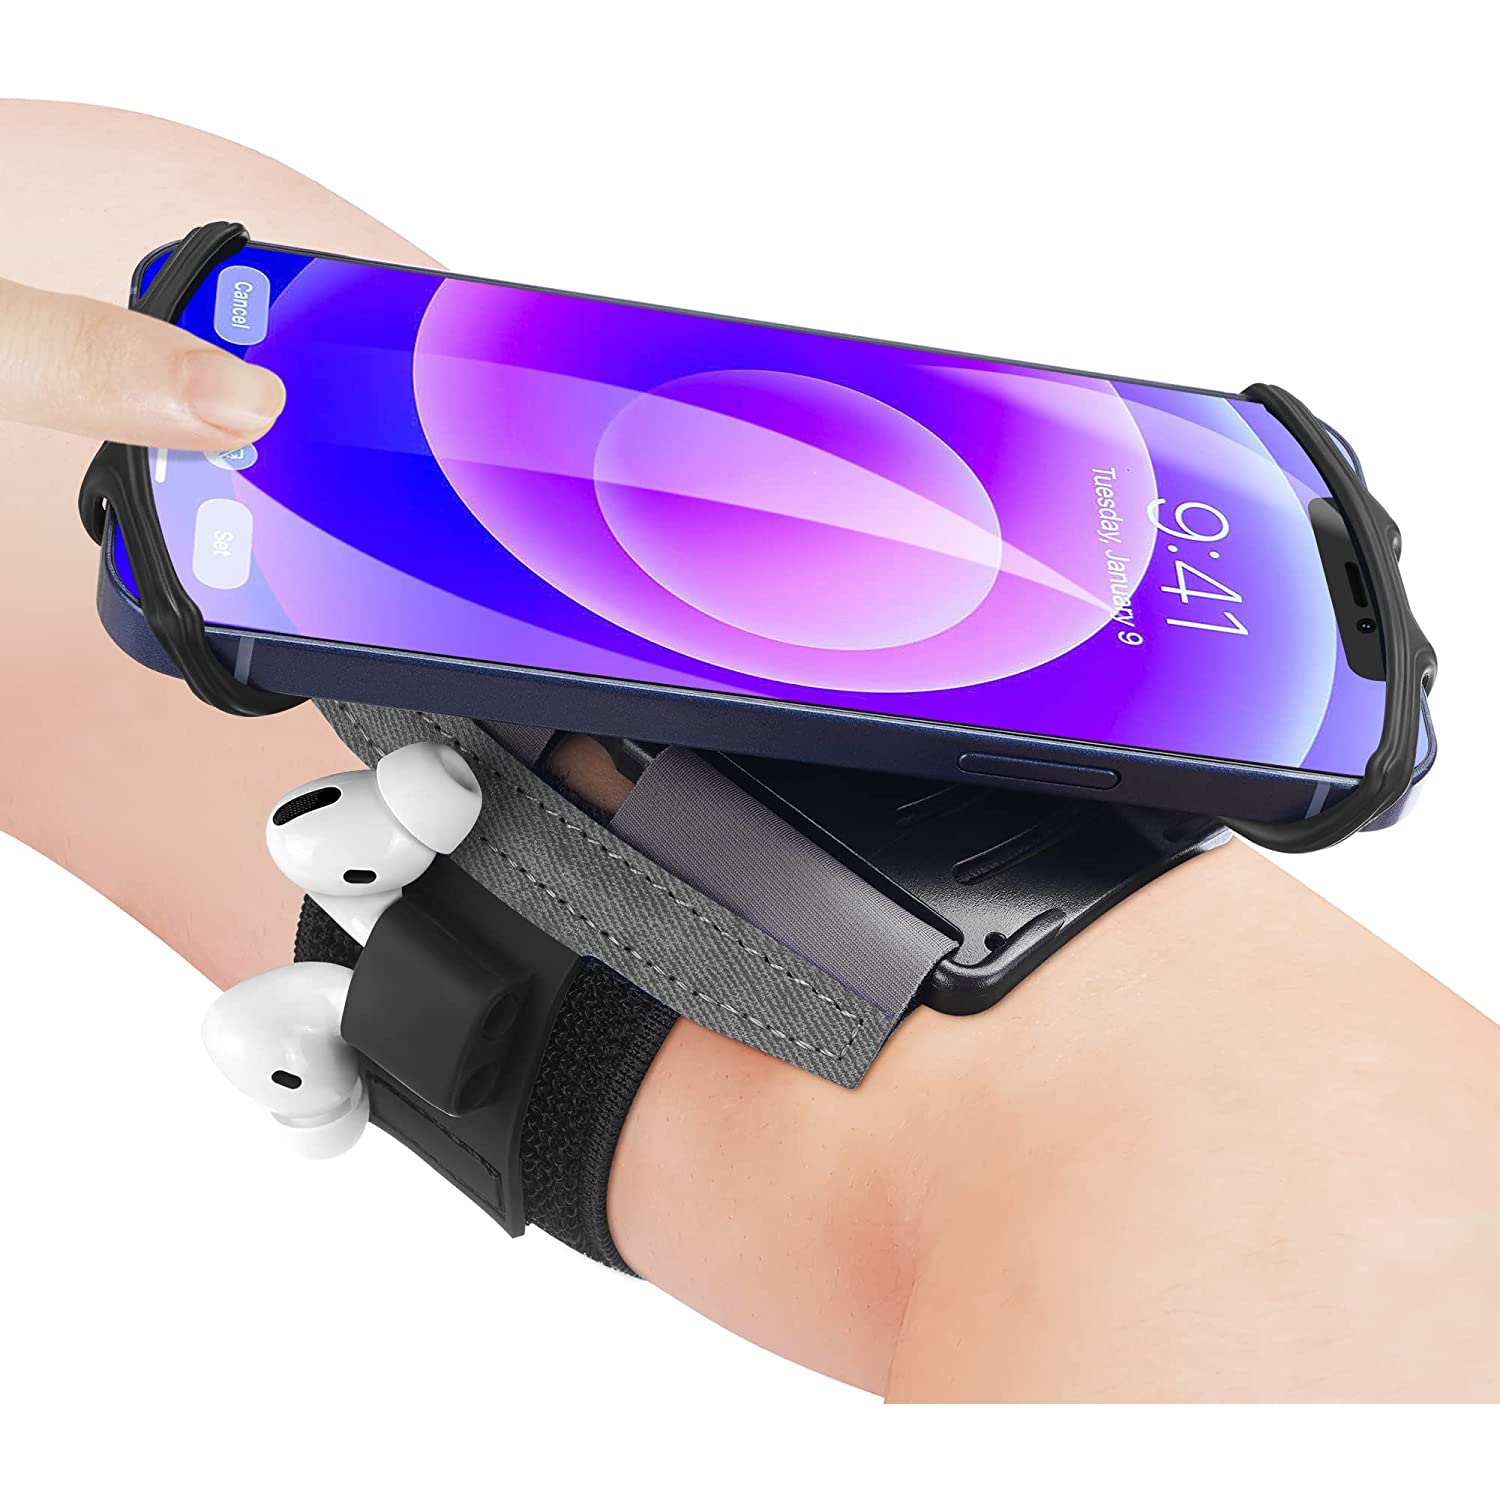 180° Rotatable Running Phone Armband :with Key Holder for Apple iPhone Xs Max XR X 8 7 6 6S Plus Samsung Galaxy S9+ S9 S8 S7 S6 Edge Note 8 Google Pixel LG,for Sports Worko